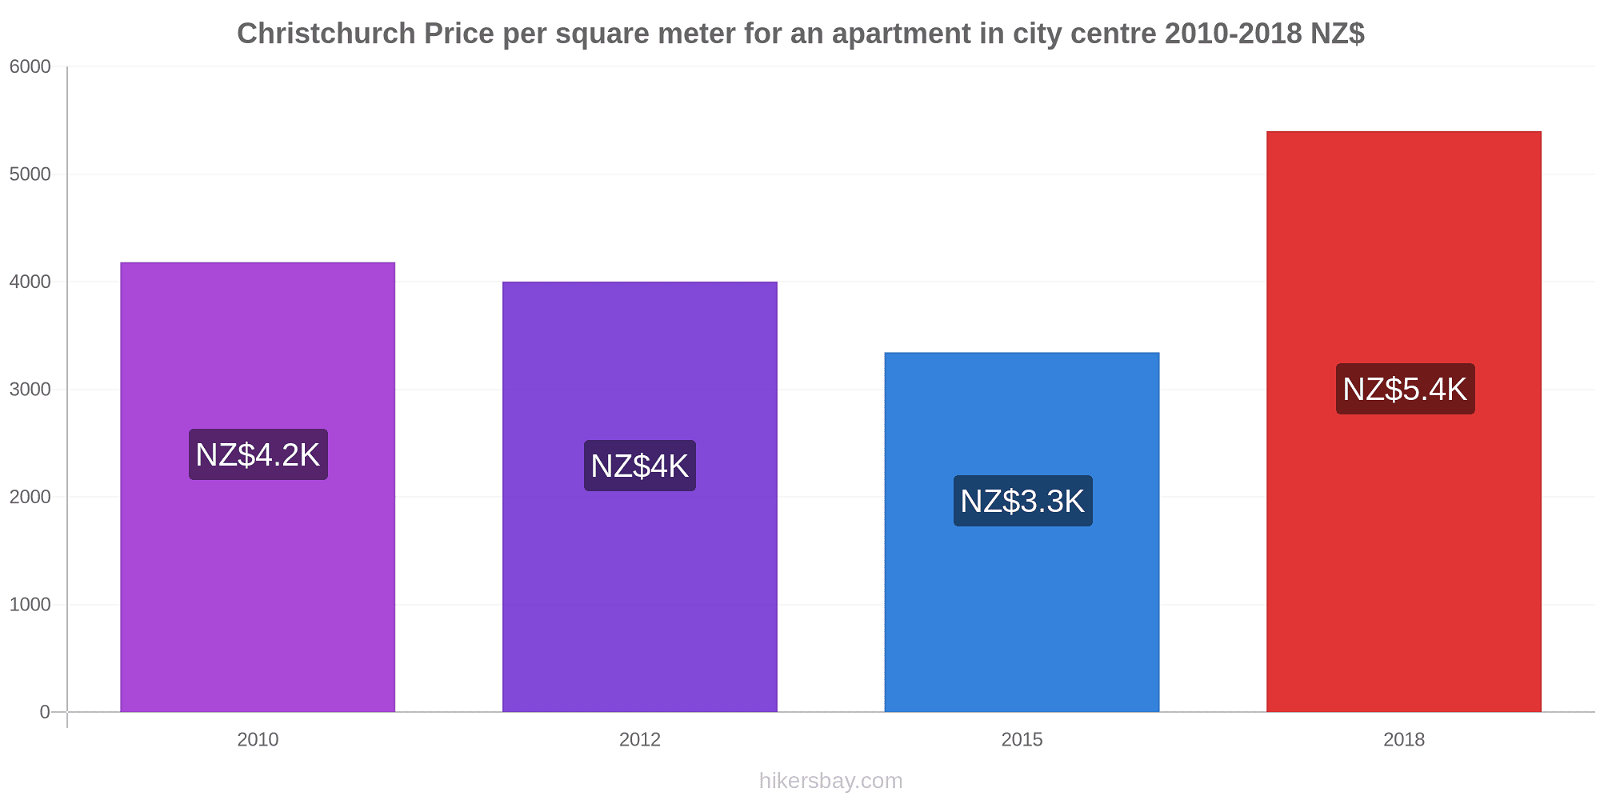 Christchurch price changes Price per square meter for an apartment in city centre hikersbay.com